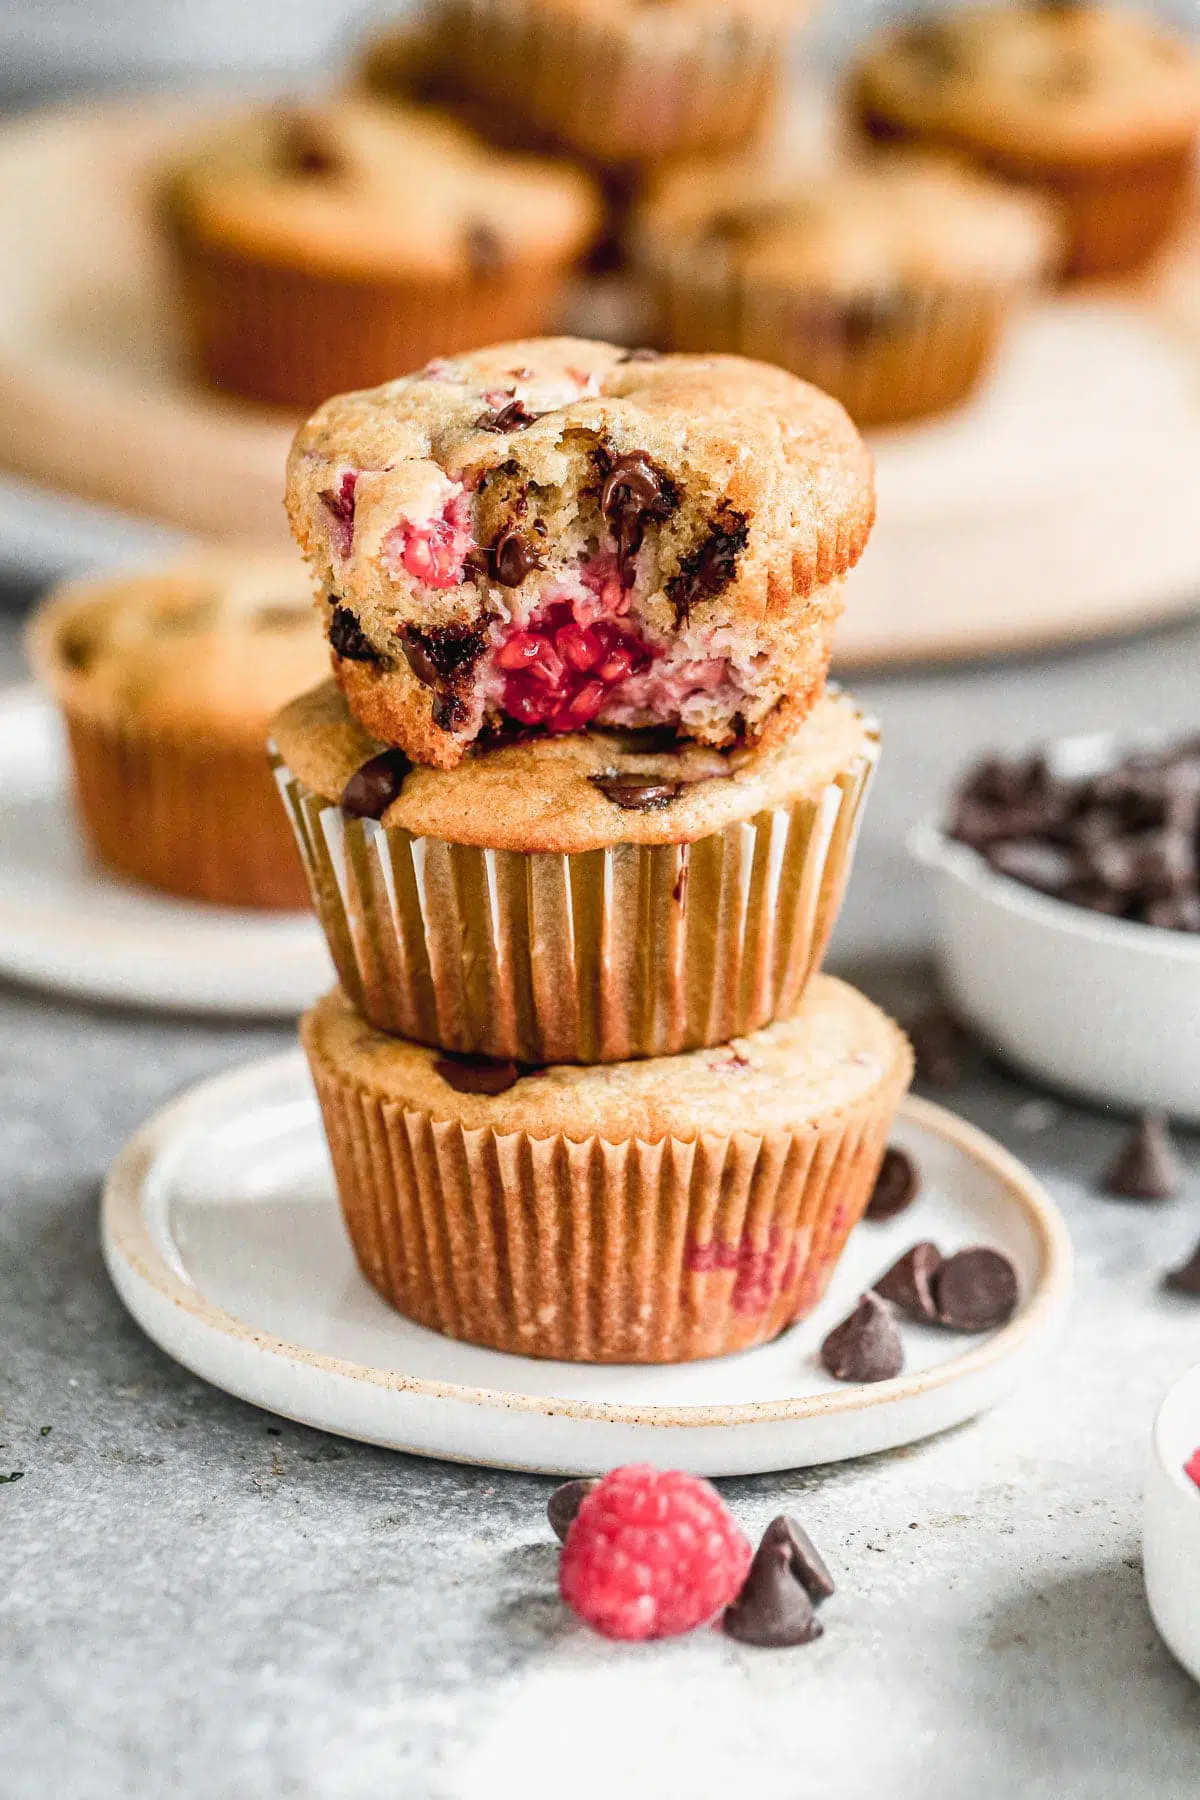 These one bowl Chocolate Raspberry Muffins are light, fluffy and full of gooey chocolate raspberry flavor. Made with protein-packed Greek yogurt, coconut oil and whole-wheat flour, they also have a good dose of healthiness so you don't have to feel completely guilty indulging. &nbsp;Perfect way to kickstart your day or nestle in a sweet pick-me-up in the afternoon.&nbsp;